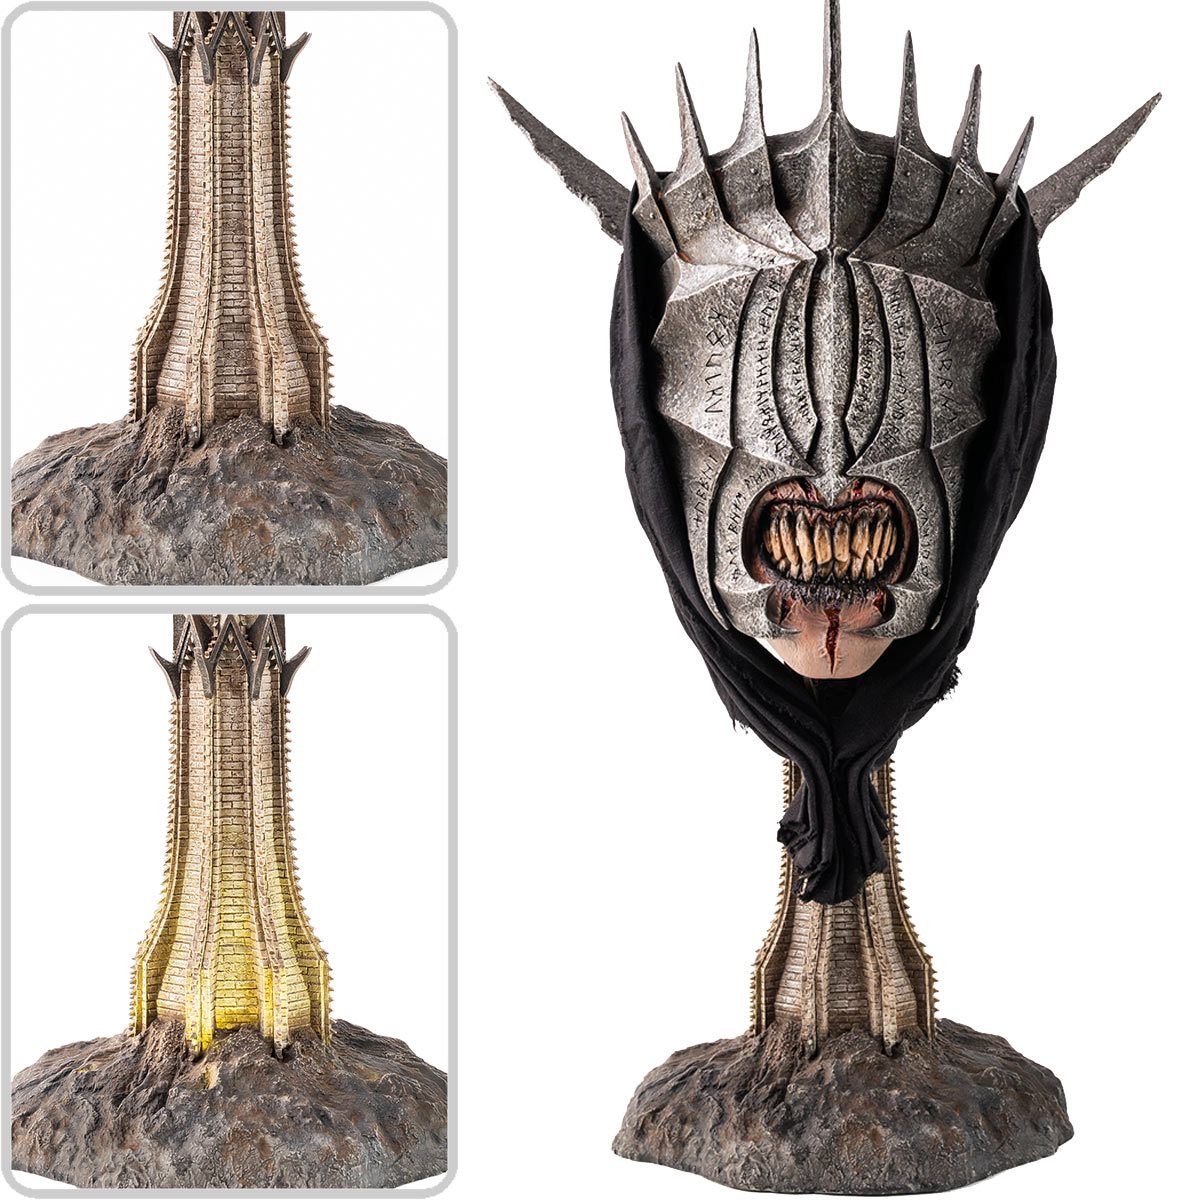 Sauron Art Mask 1:1 Scale by PureArts